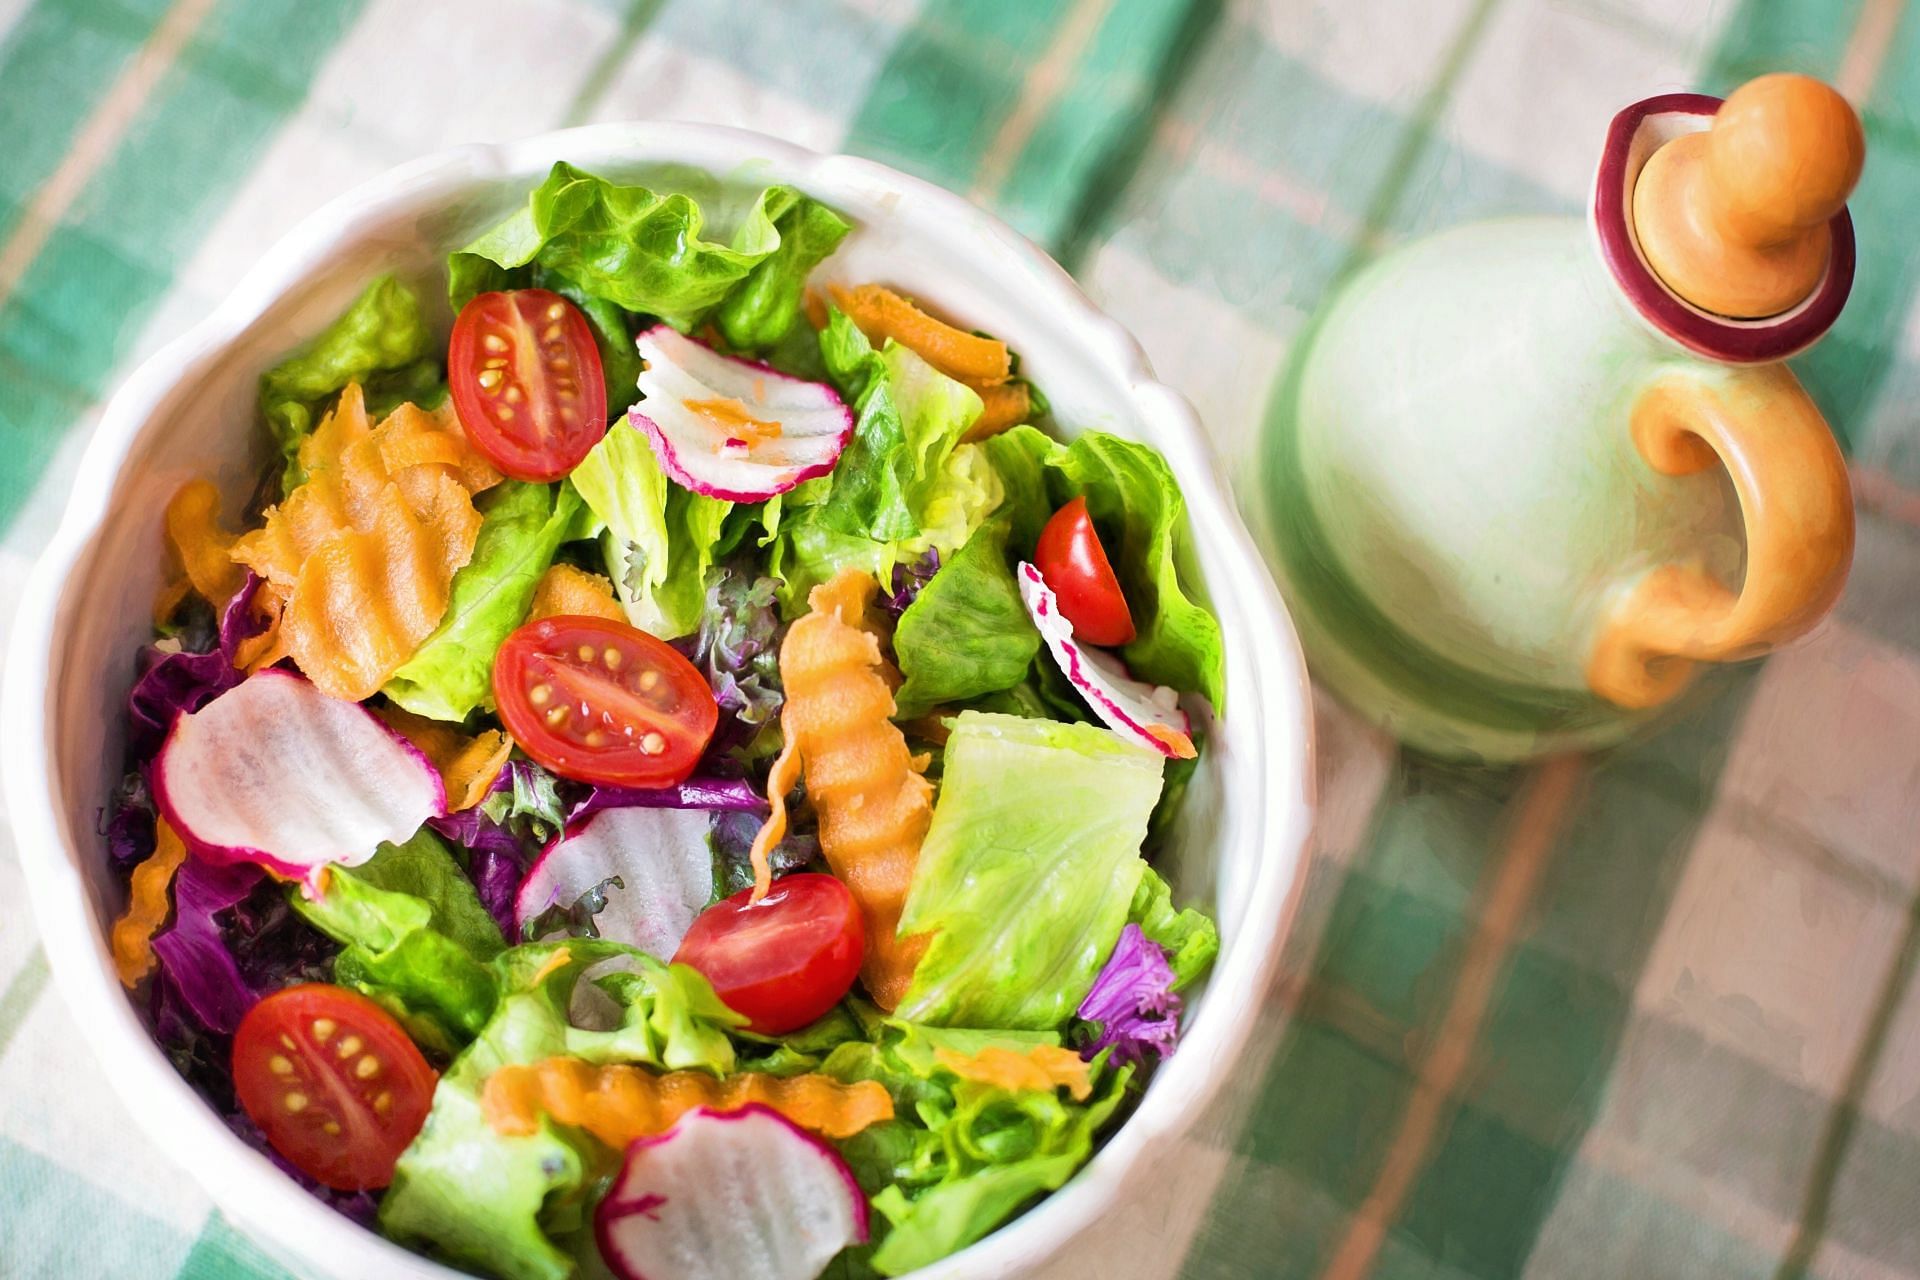 Best healthy meals for weight loss (image sourced via Pexels / Photo by jill)